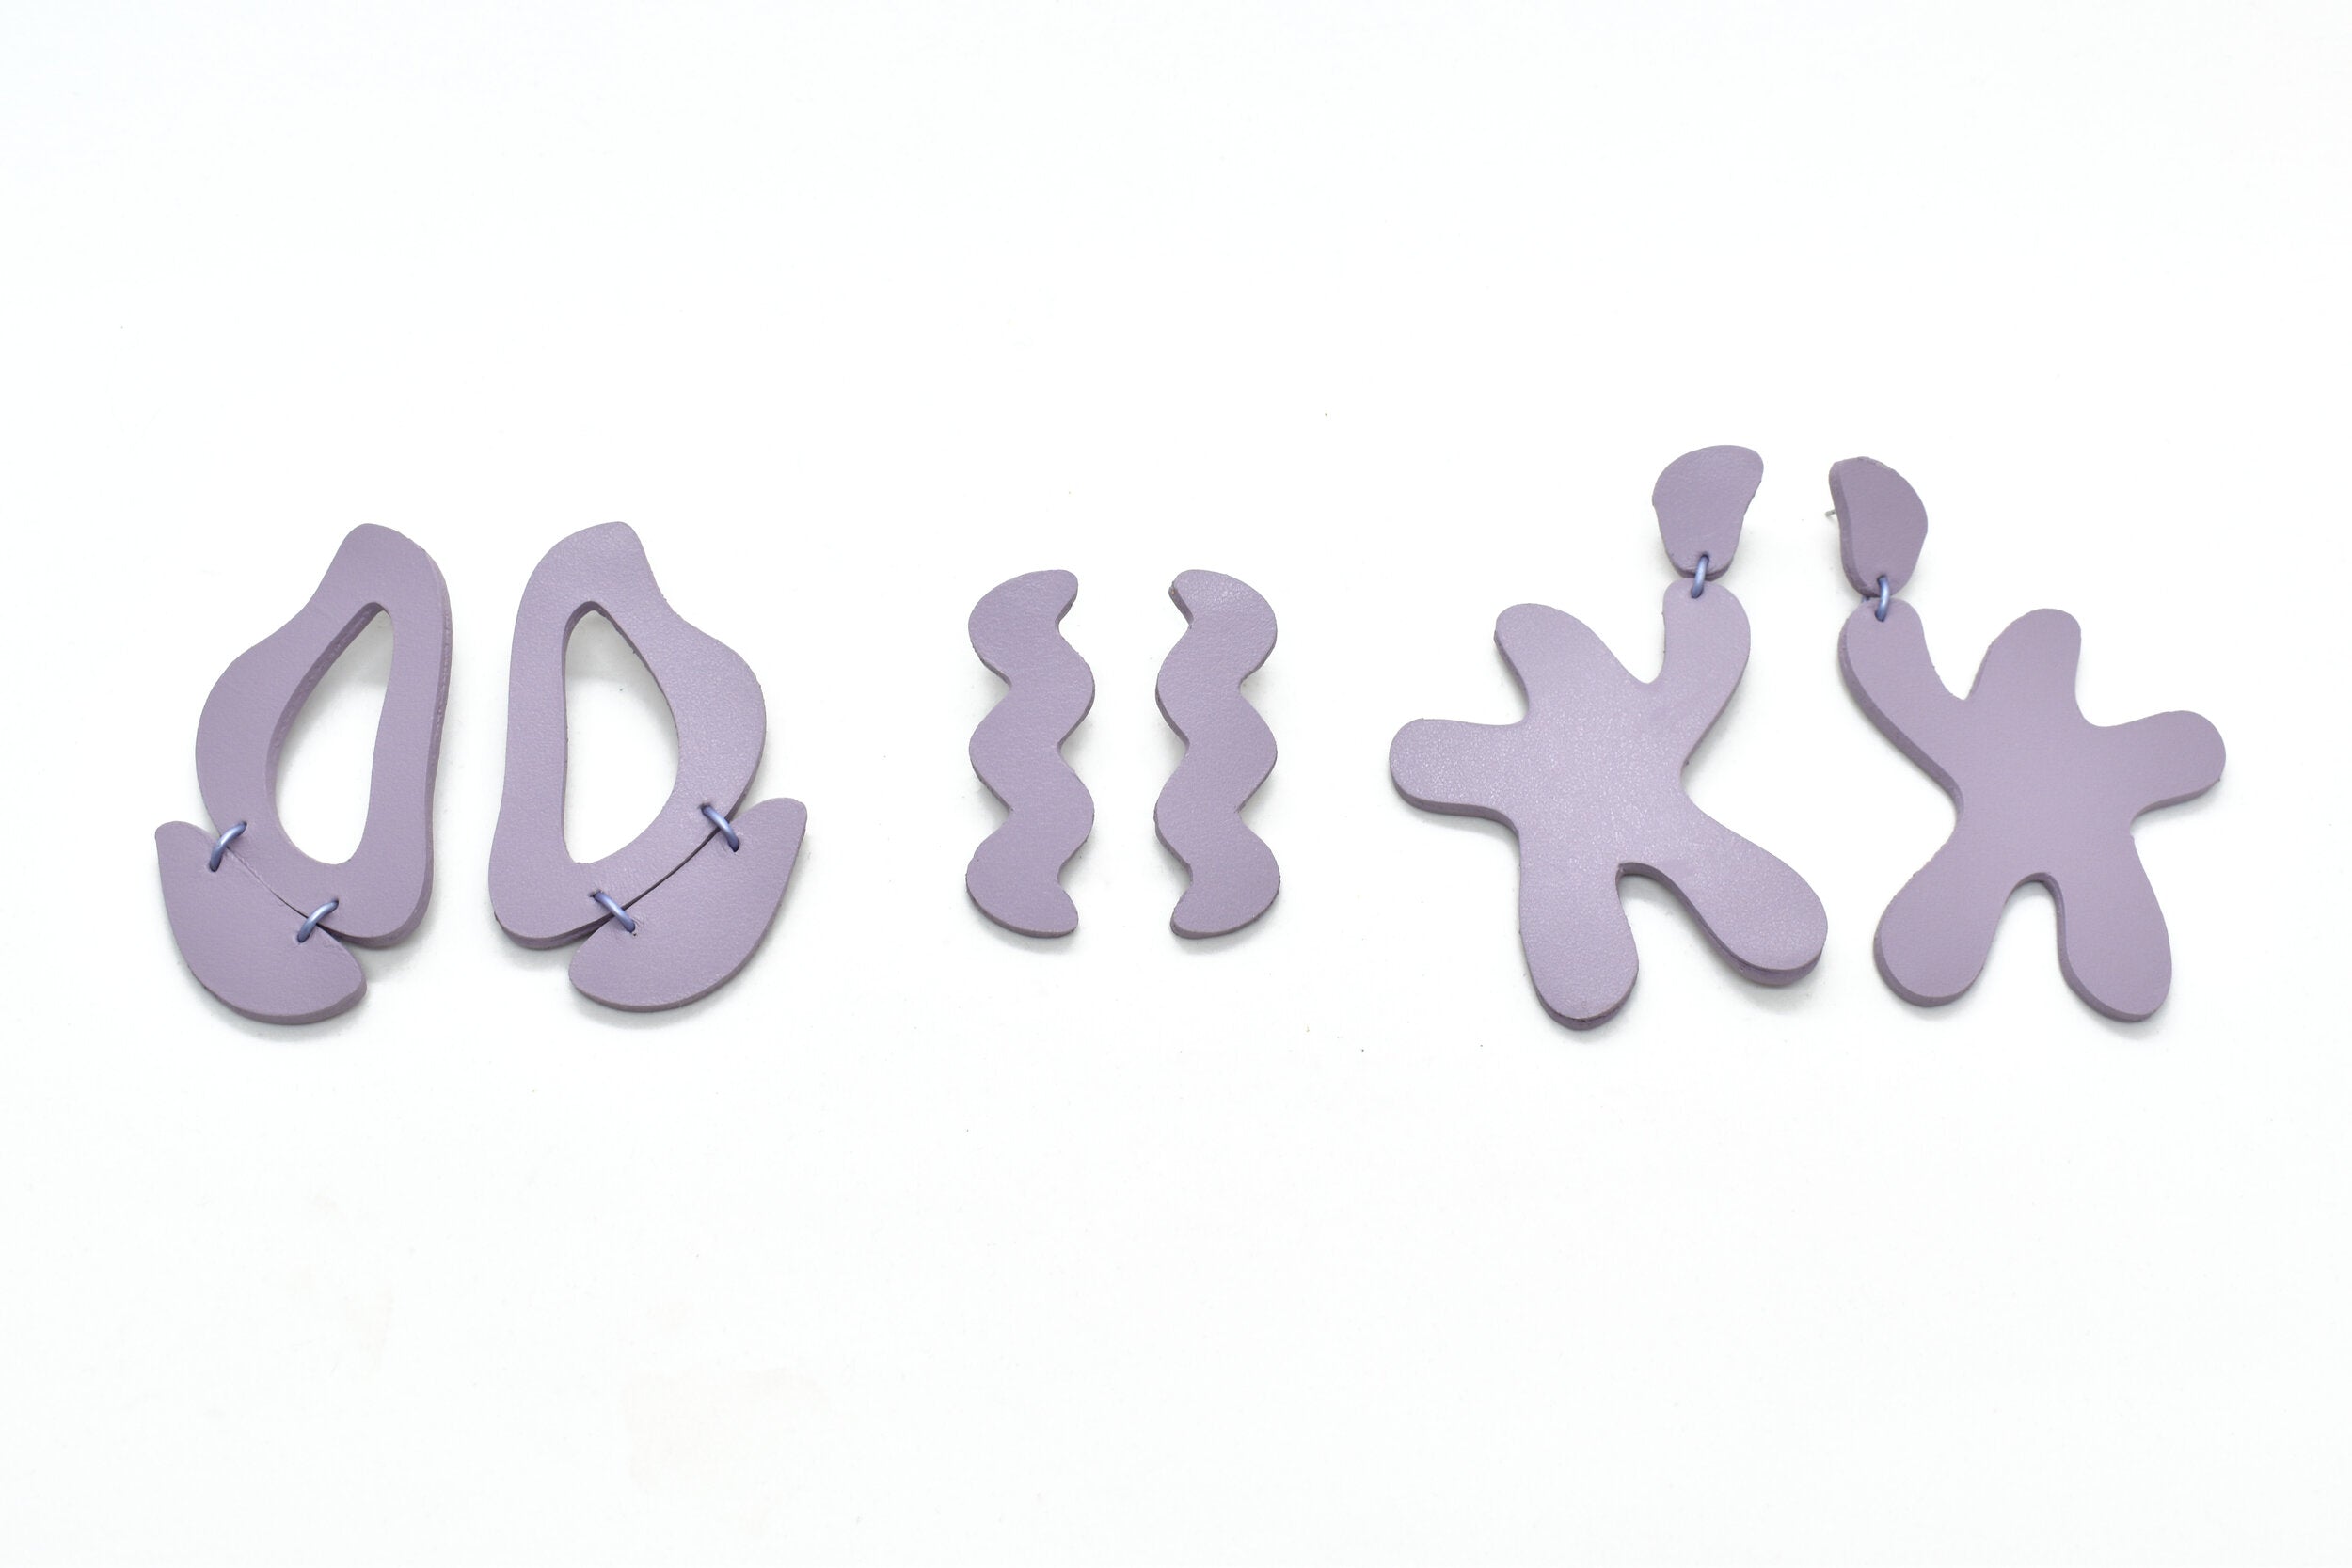 three pairs of irregular shape oversized statement earrings in real lavender leather.